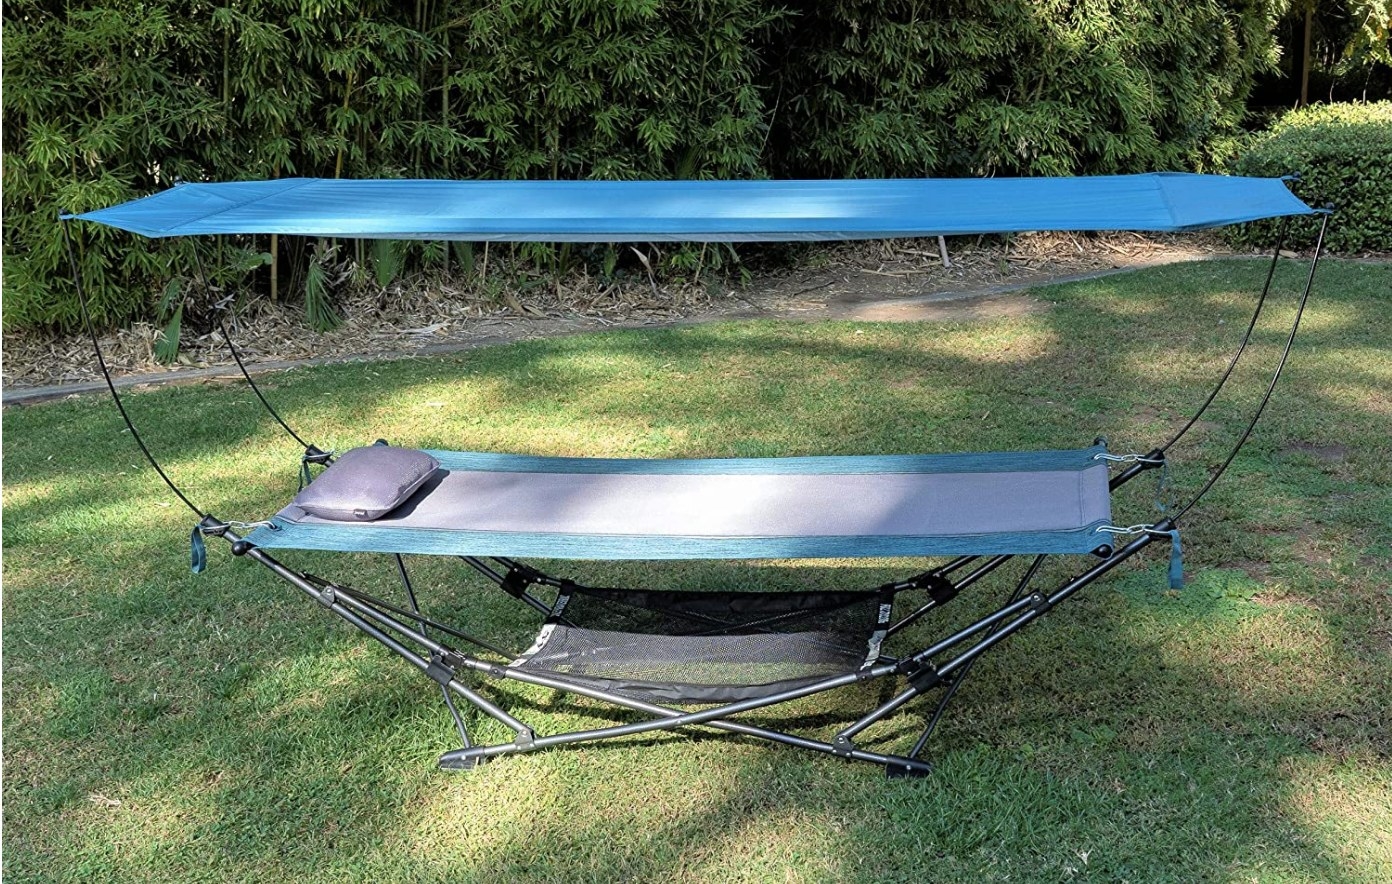 A teal, collapsible, portable canopy hammock on a lawn